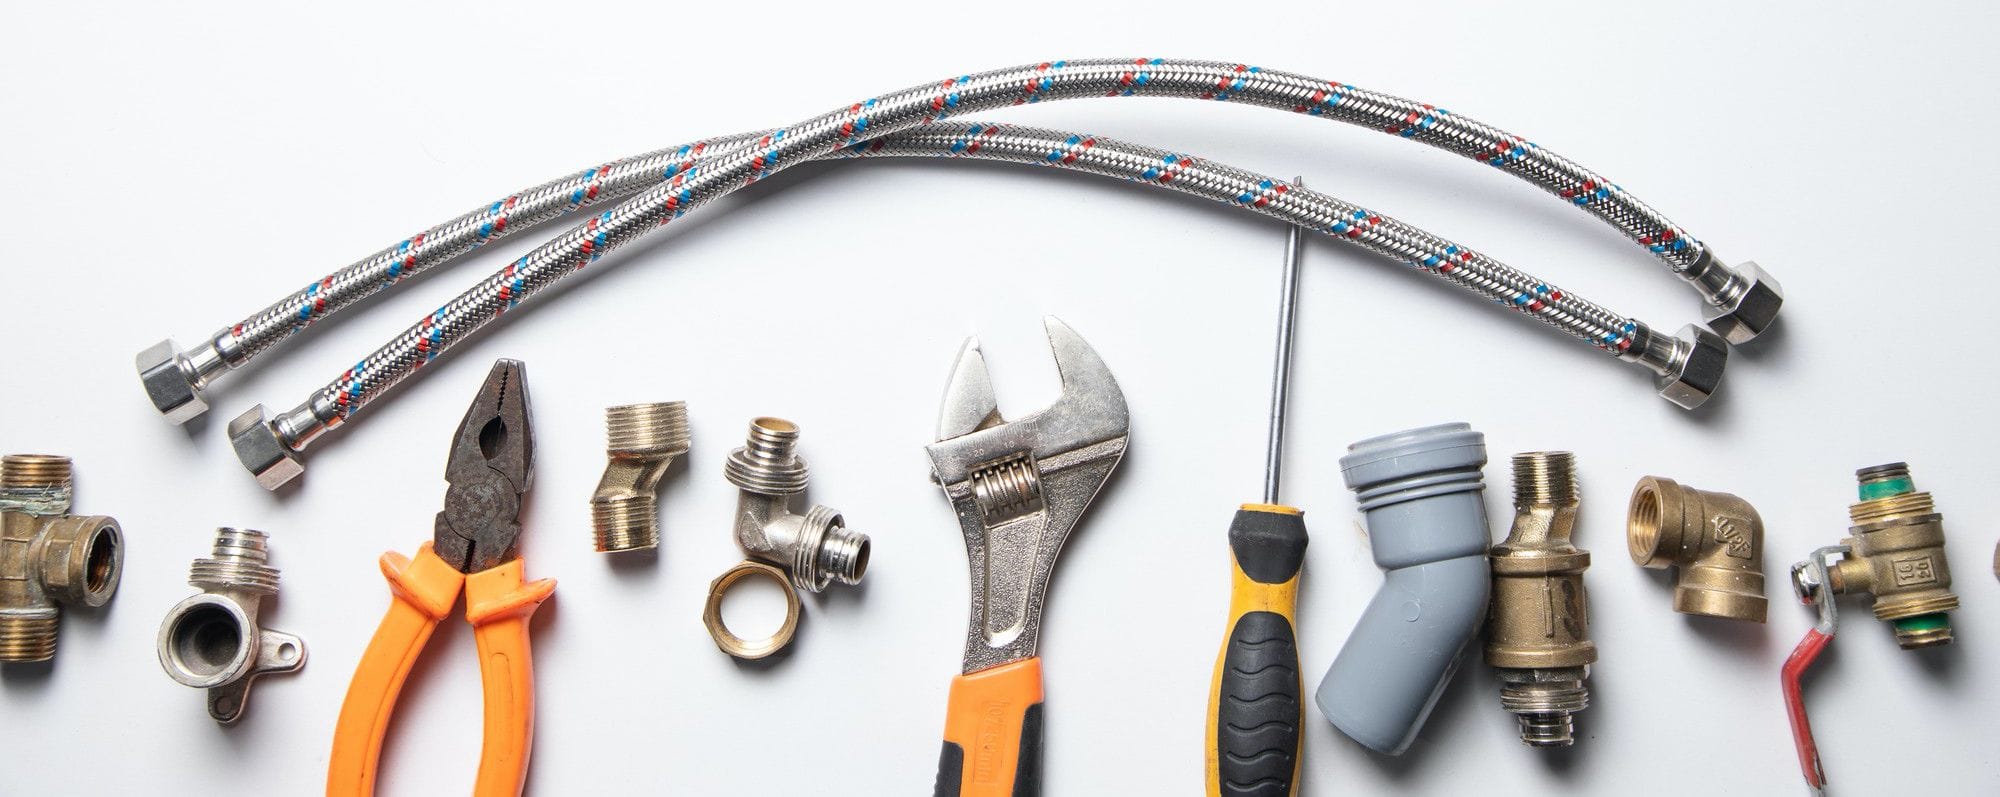 Important Preventative Maintenance Tips to Protect Your Plumbing